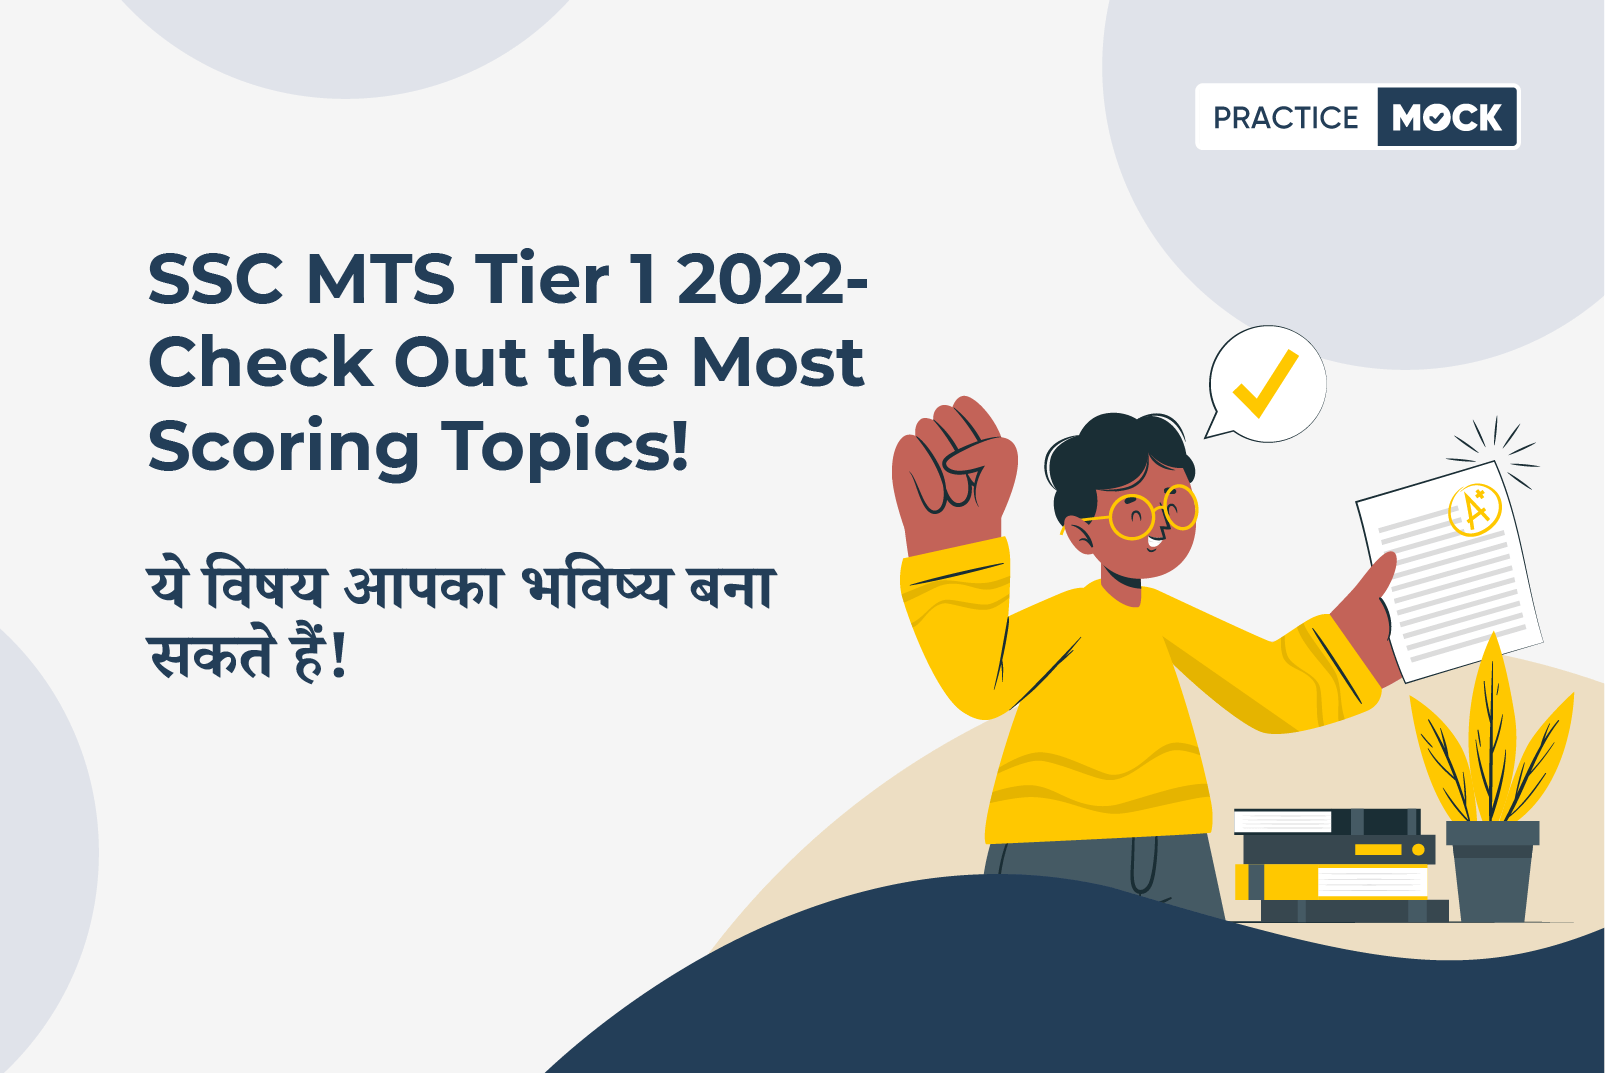 SSC MTS Tier 1 2022-Important Topics to Maximize Your Score